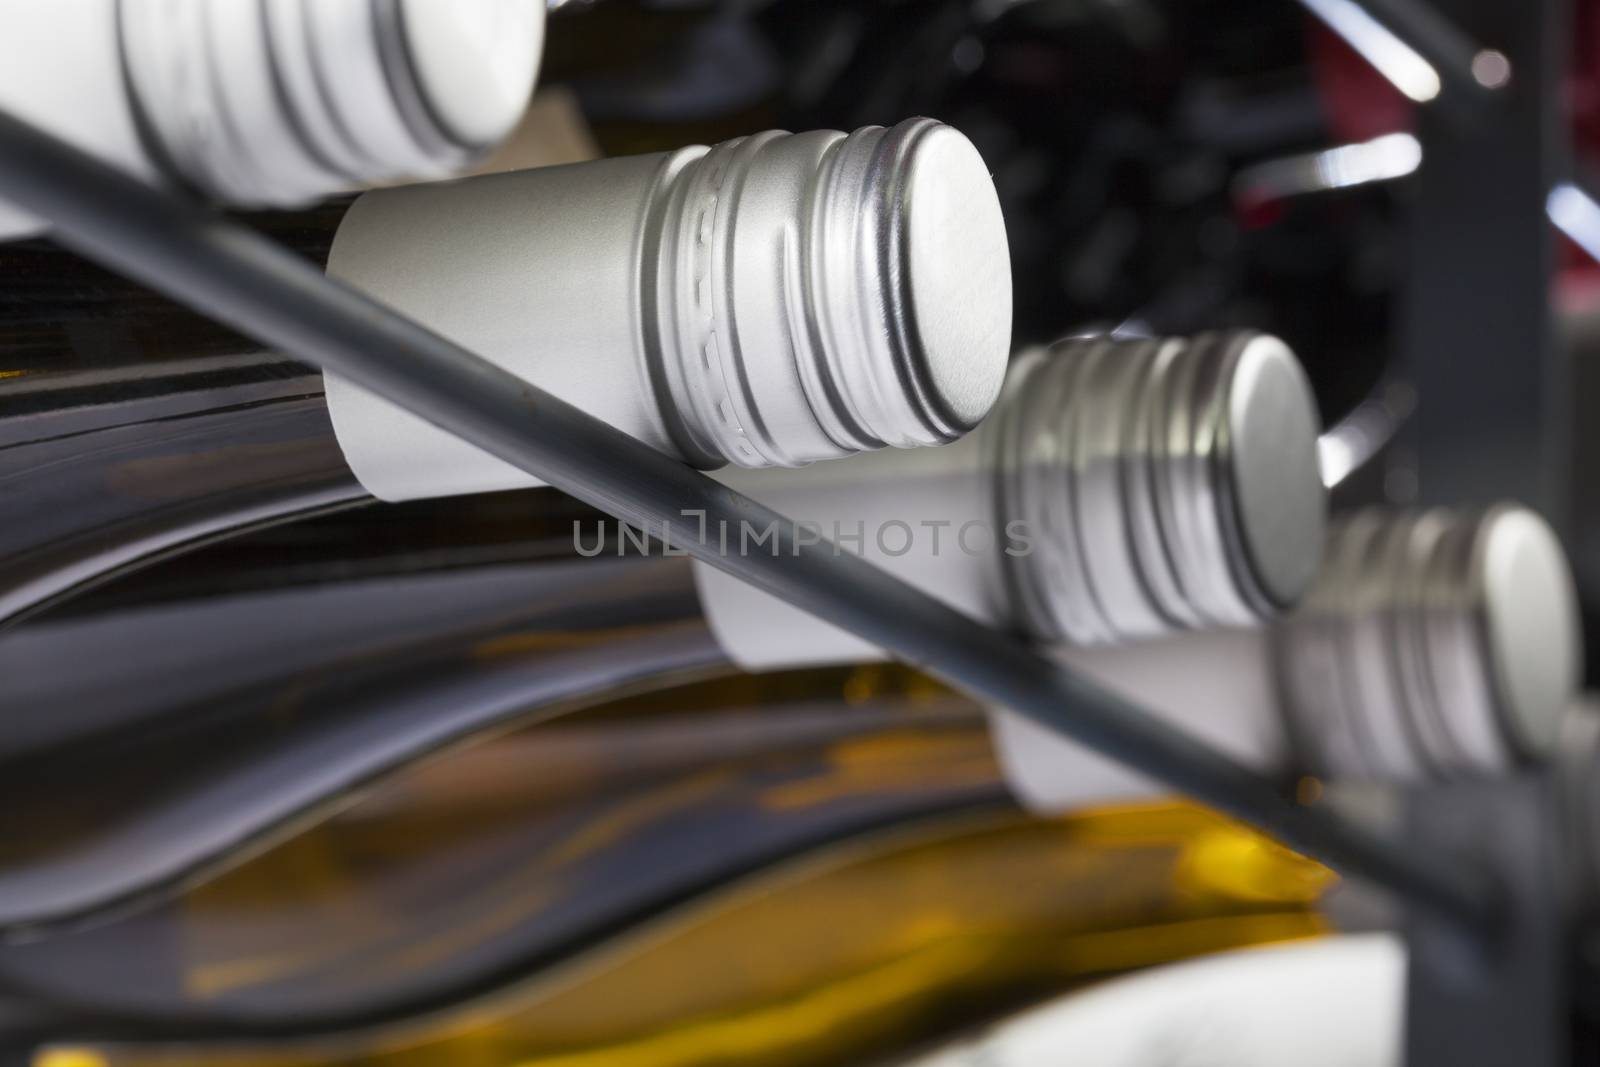 Storage of quality wine bottles with screw caps in a wine rack